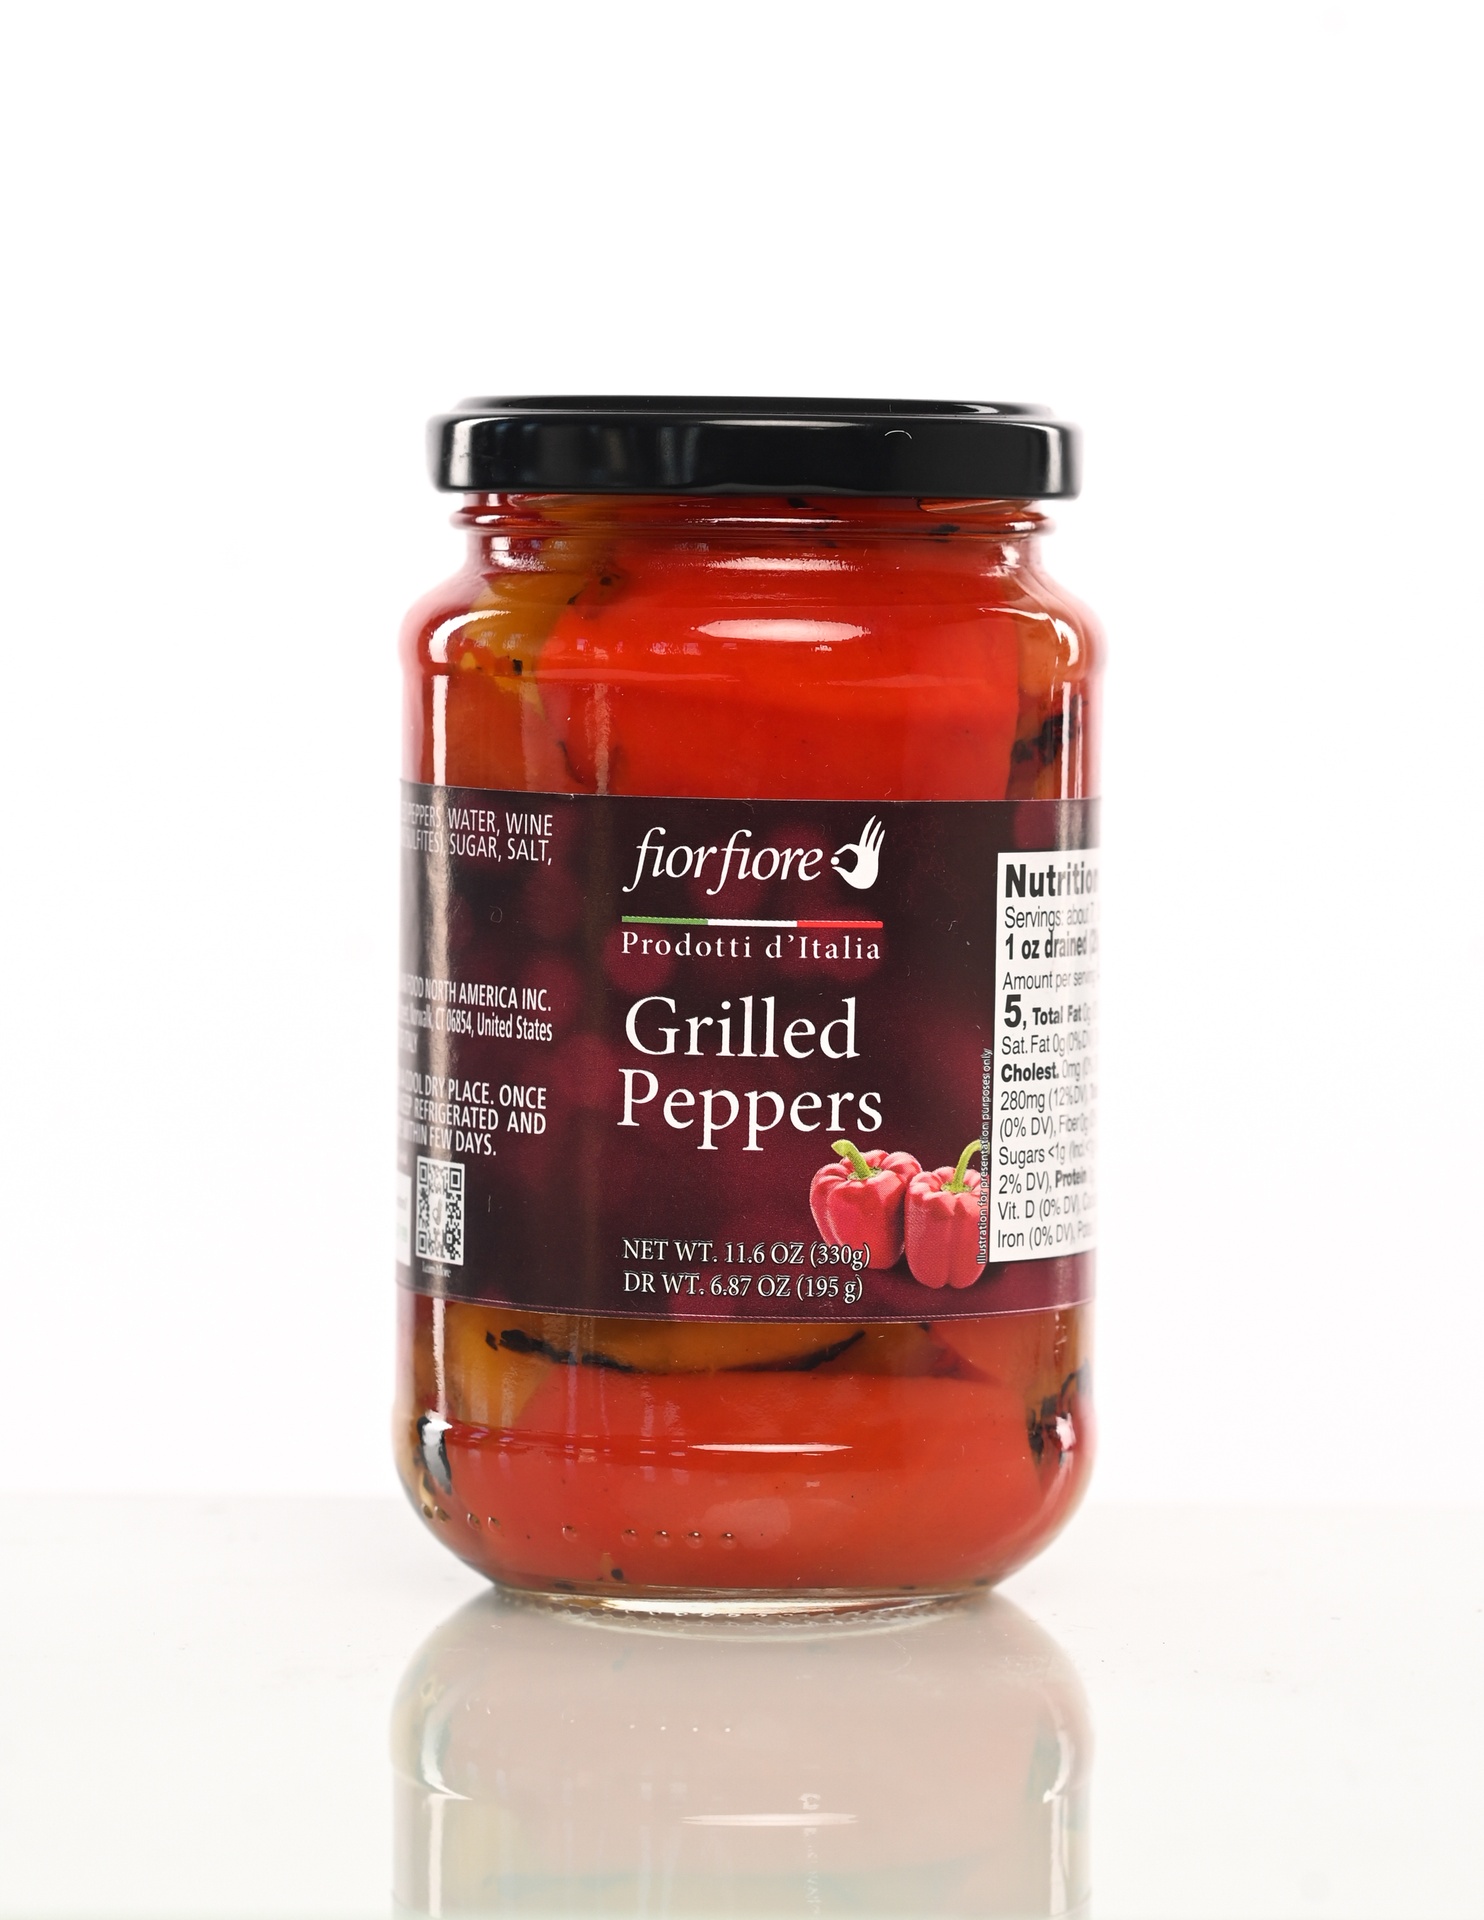 Fiorfiore Grilled Peppers au natural 11,60 oz